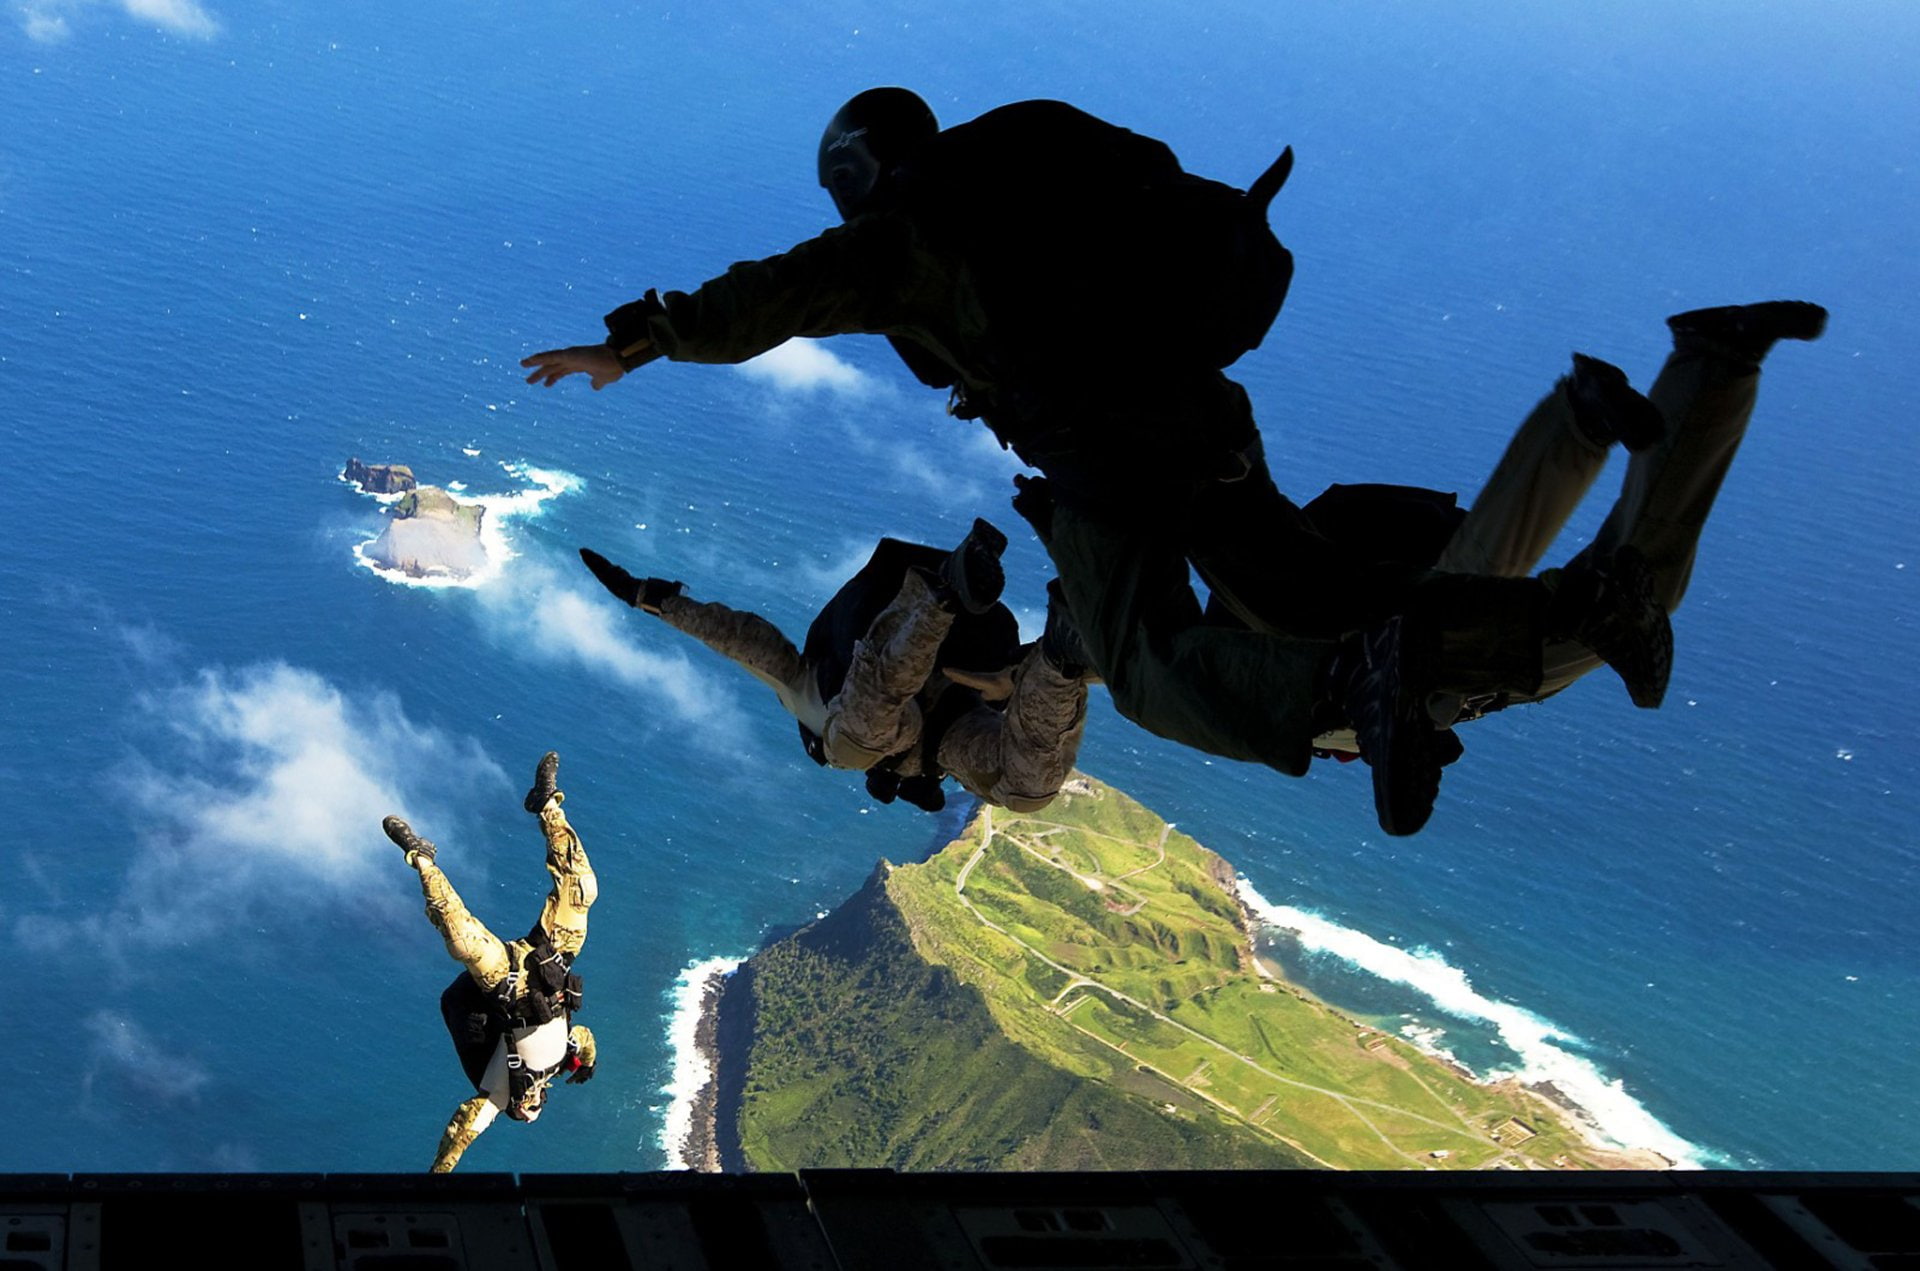 Military, Paratrooper, Parachute, United Sates Navy Seals, United States Navy